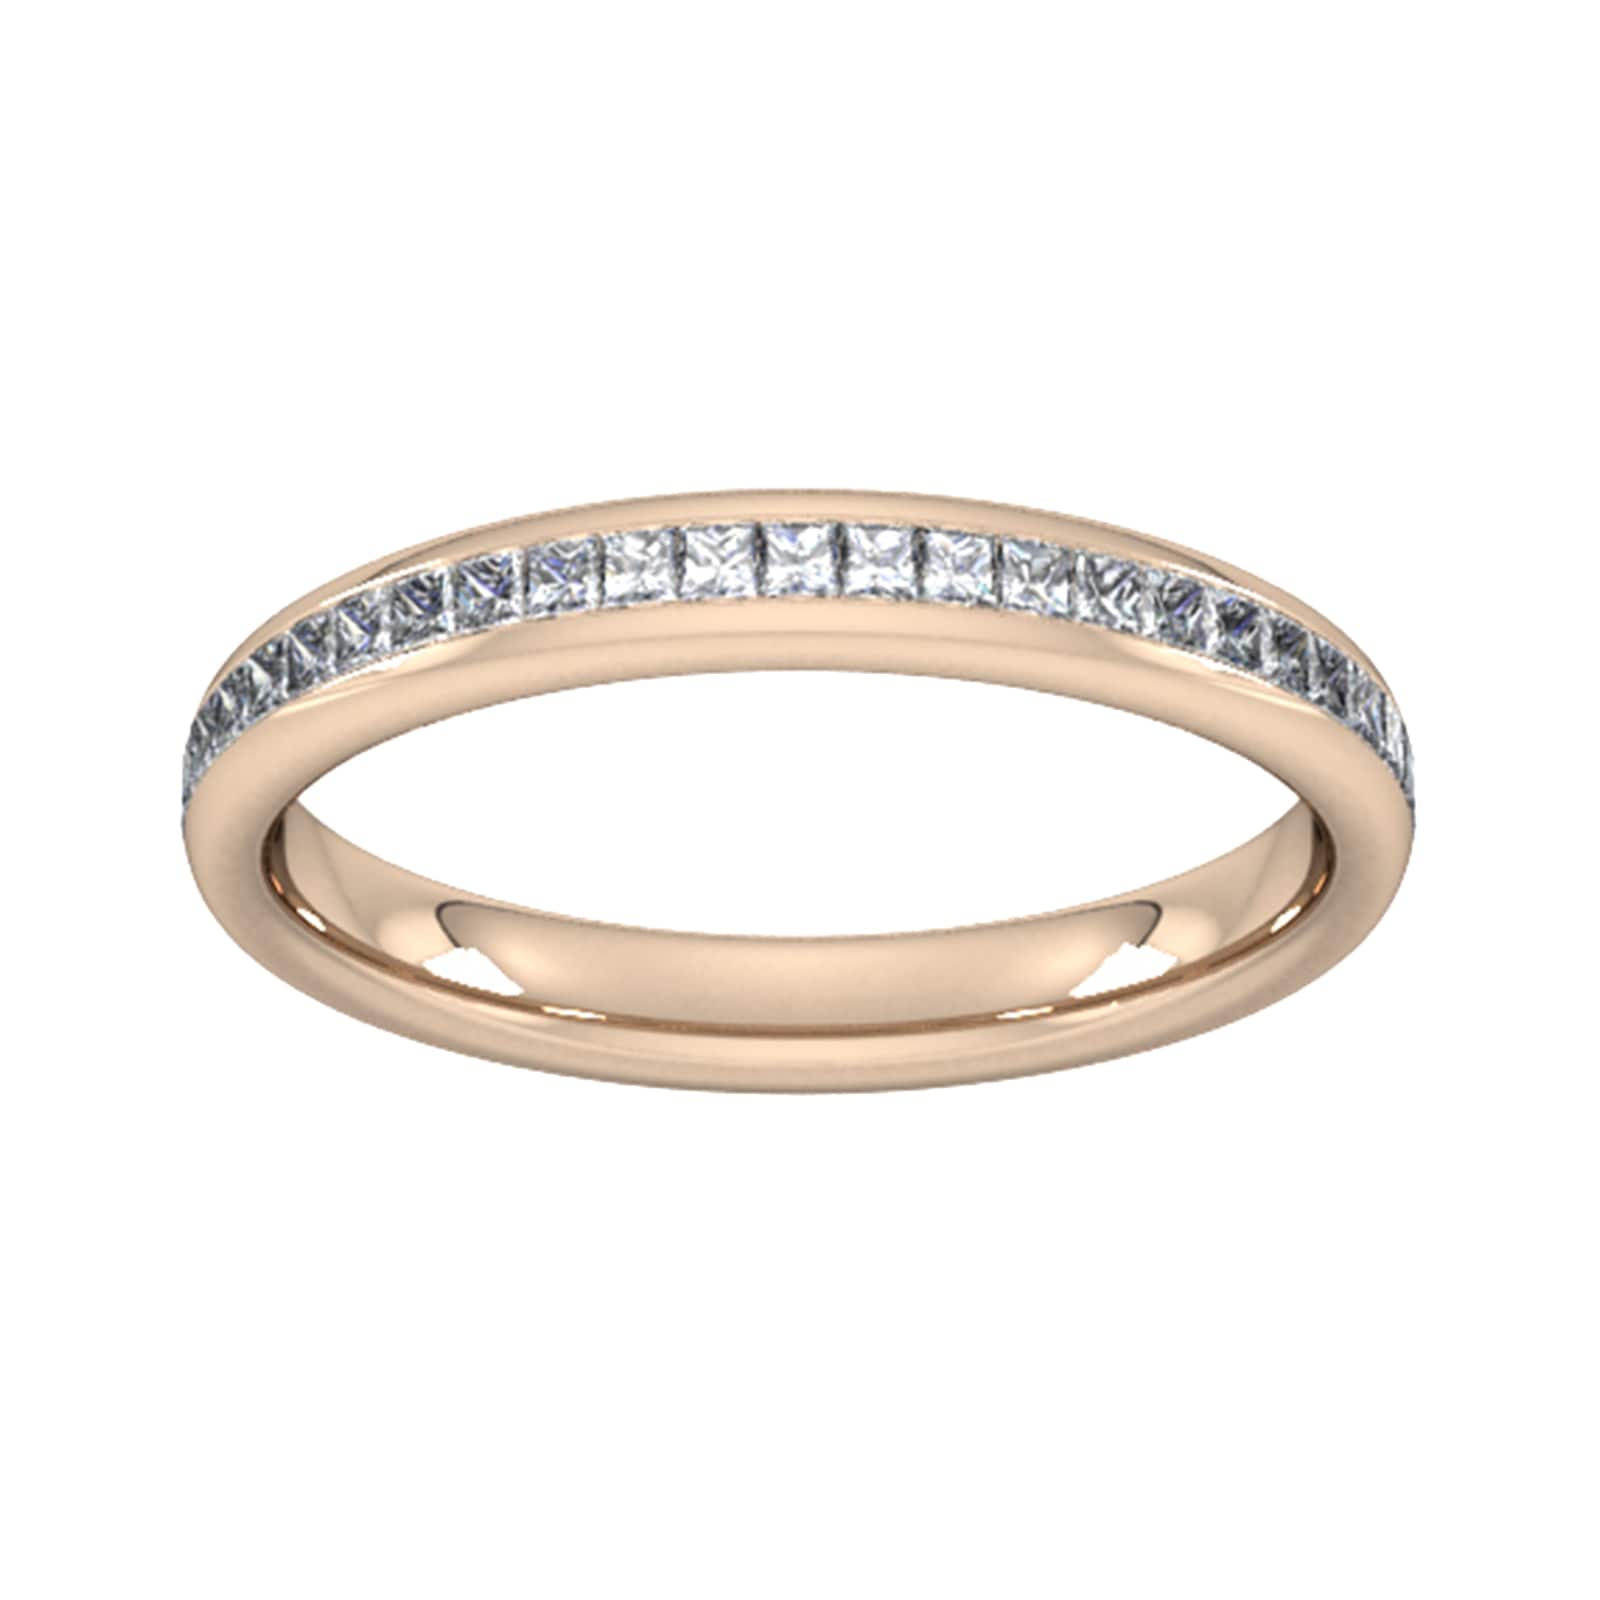 0.34 Carat Total Weight Princess Cut Channel Set Wedding Ring In 18 Carat Rose Gold - Ring Size V